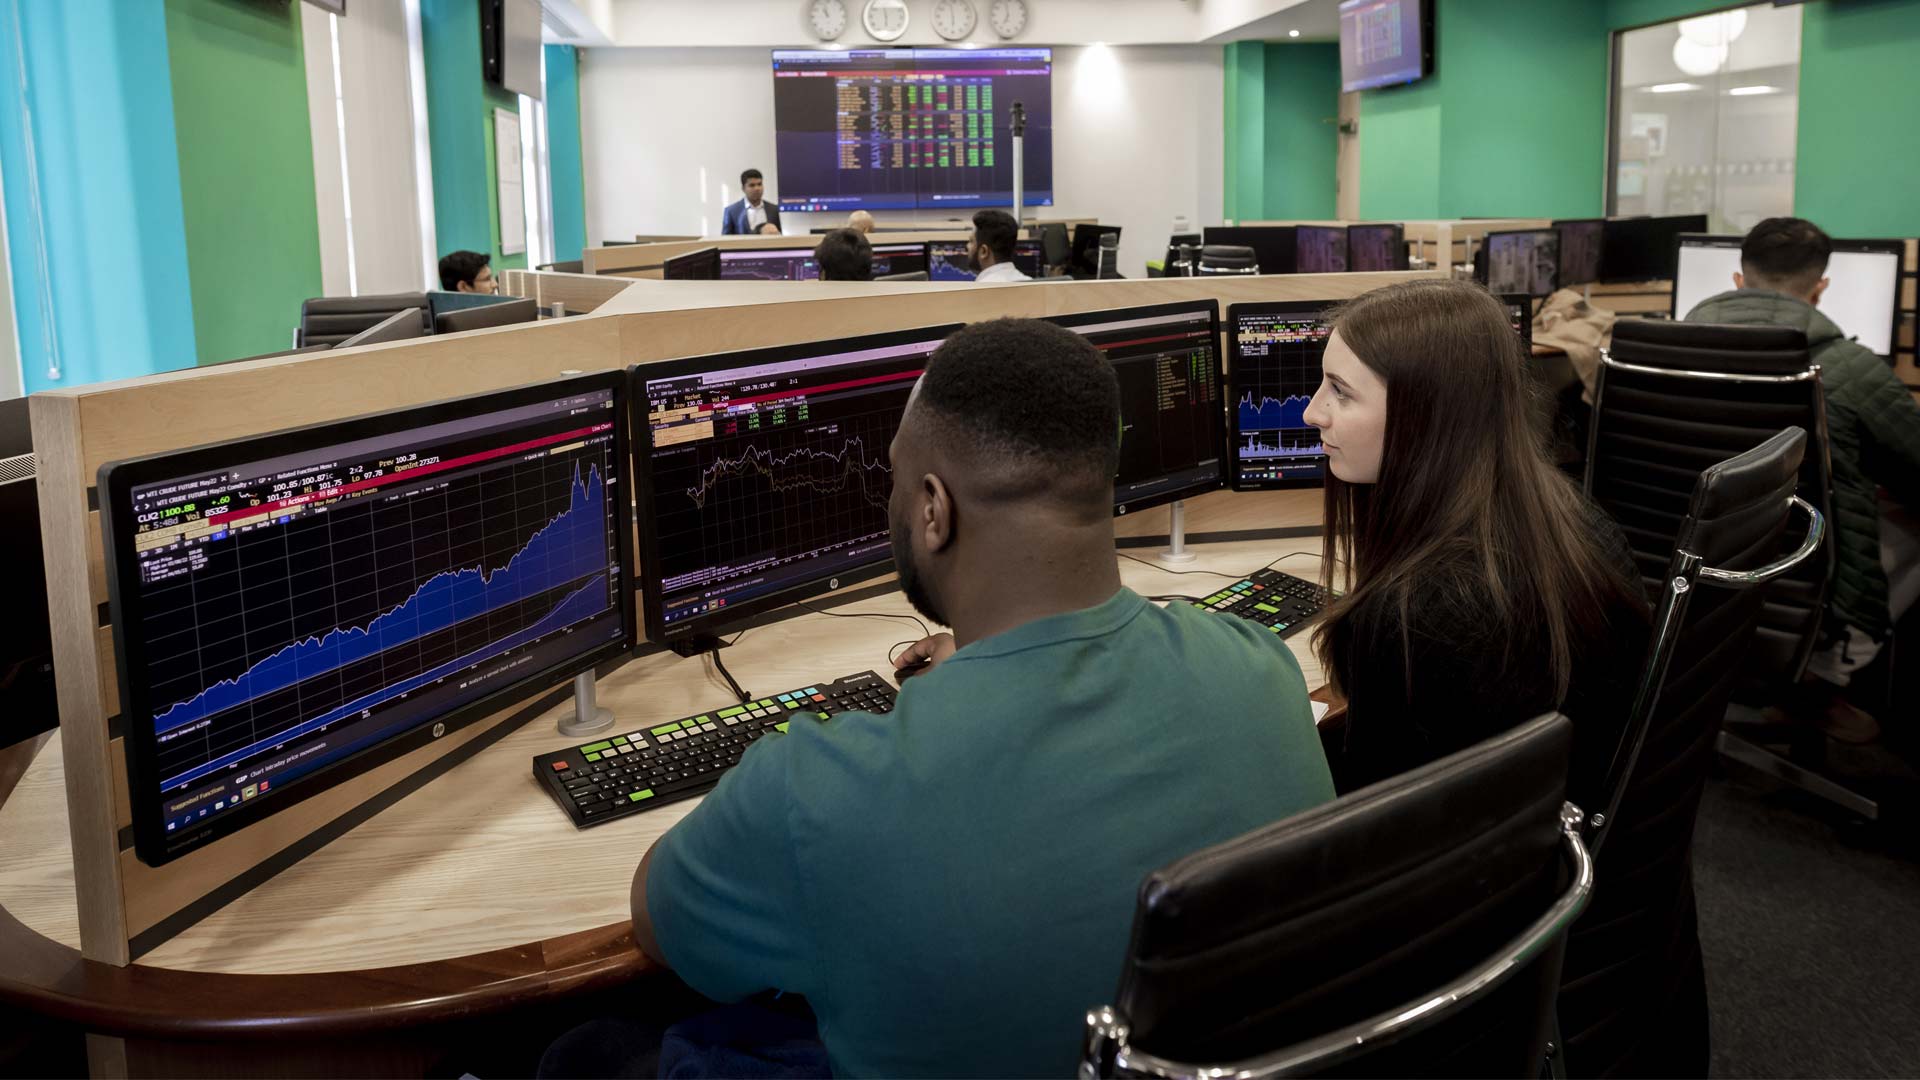 Two students in front of a bank of screens displaying financial data.